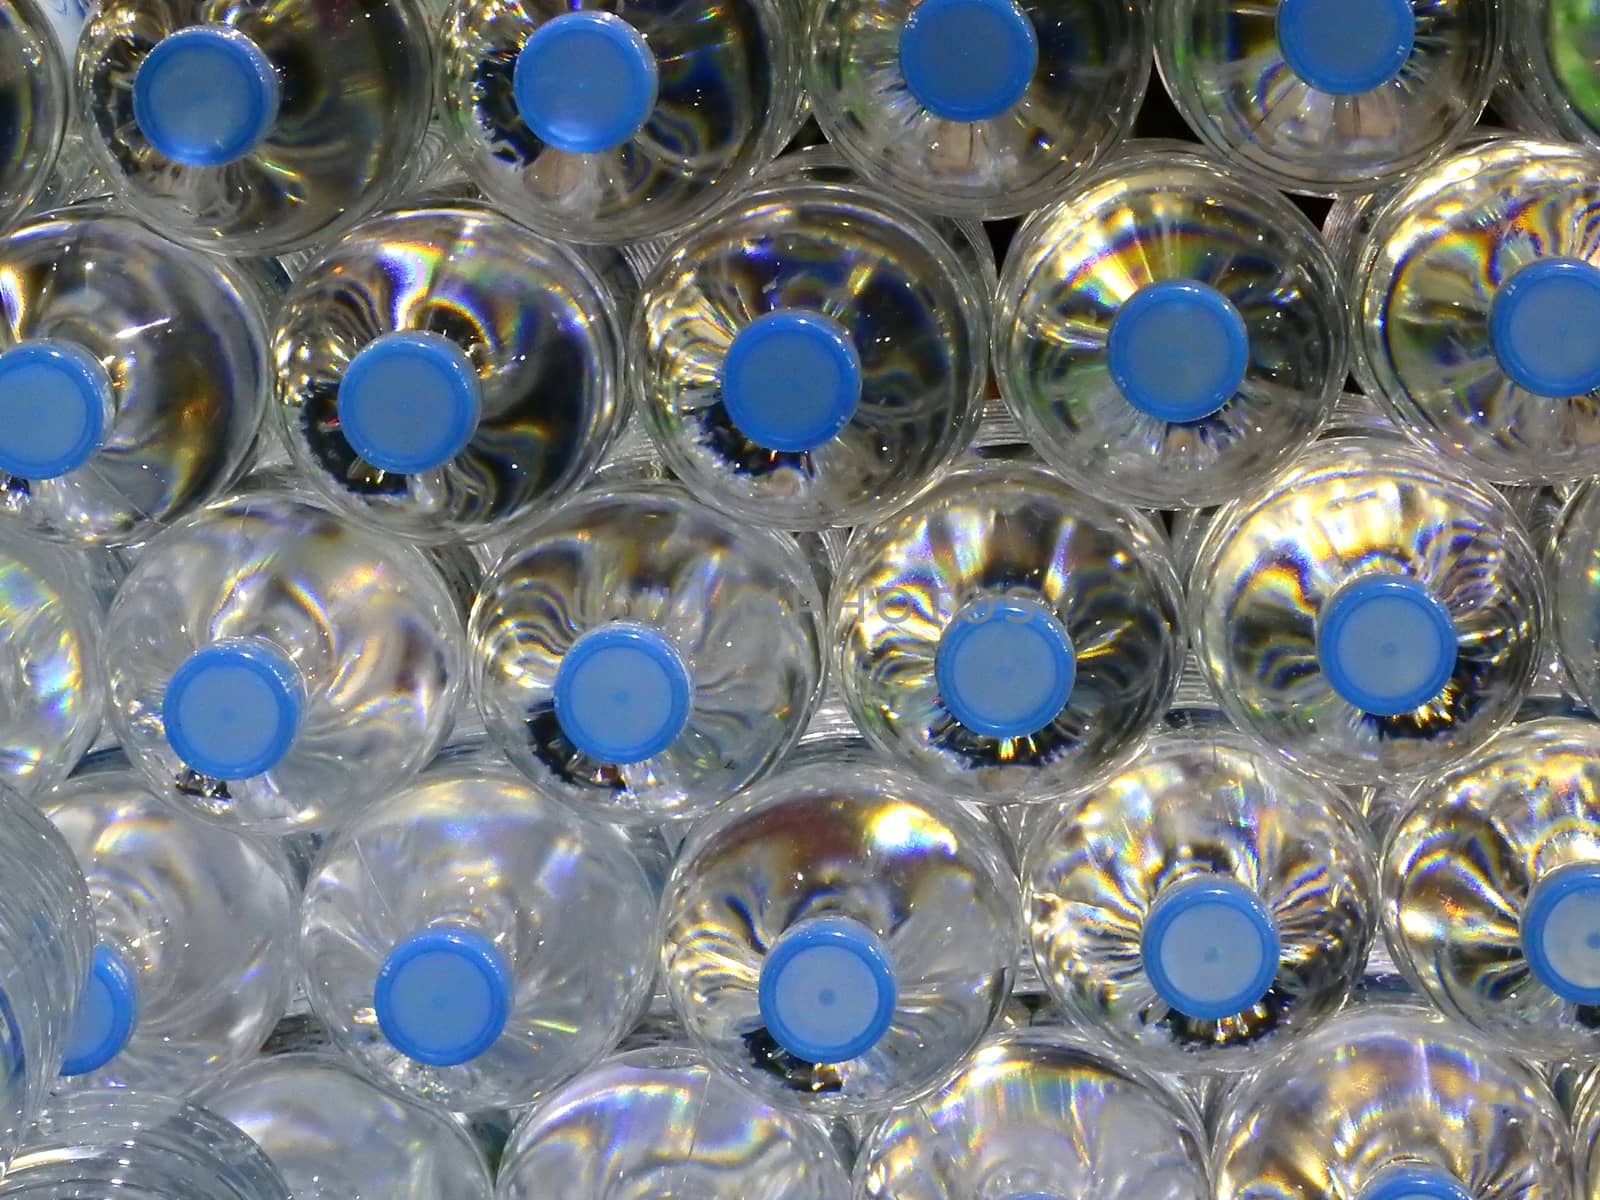 Close Up on mineral water bottles in top view.